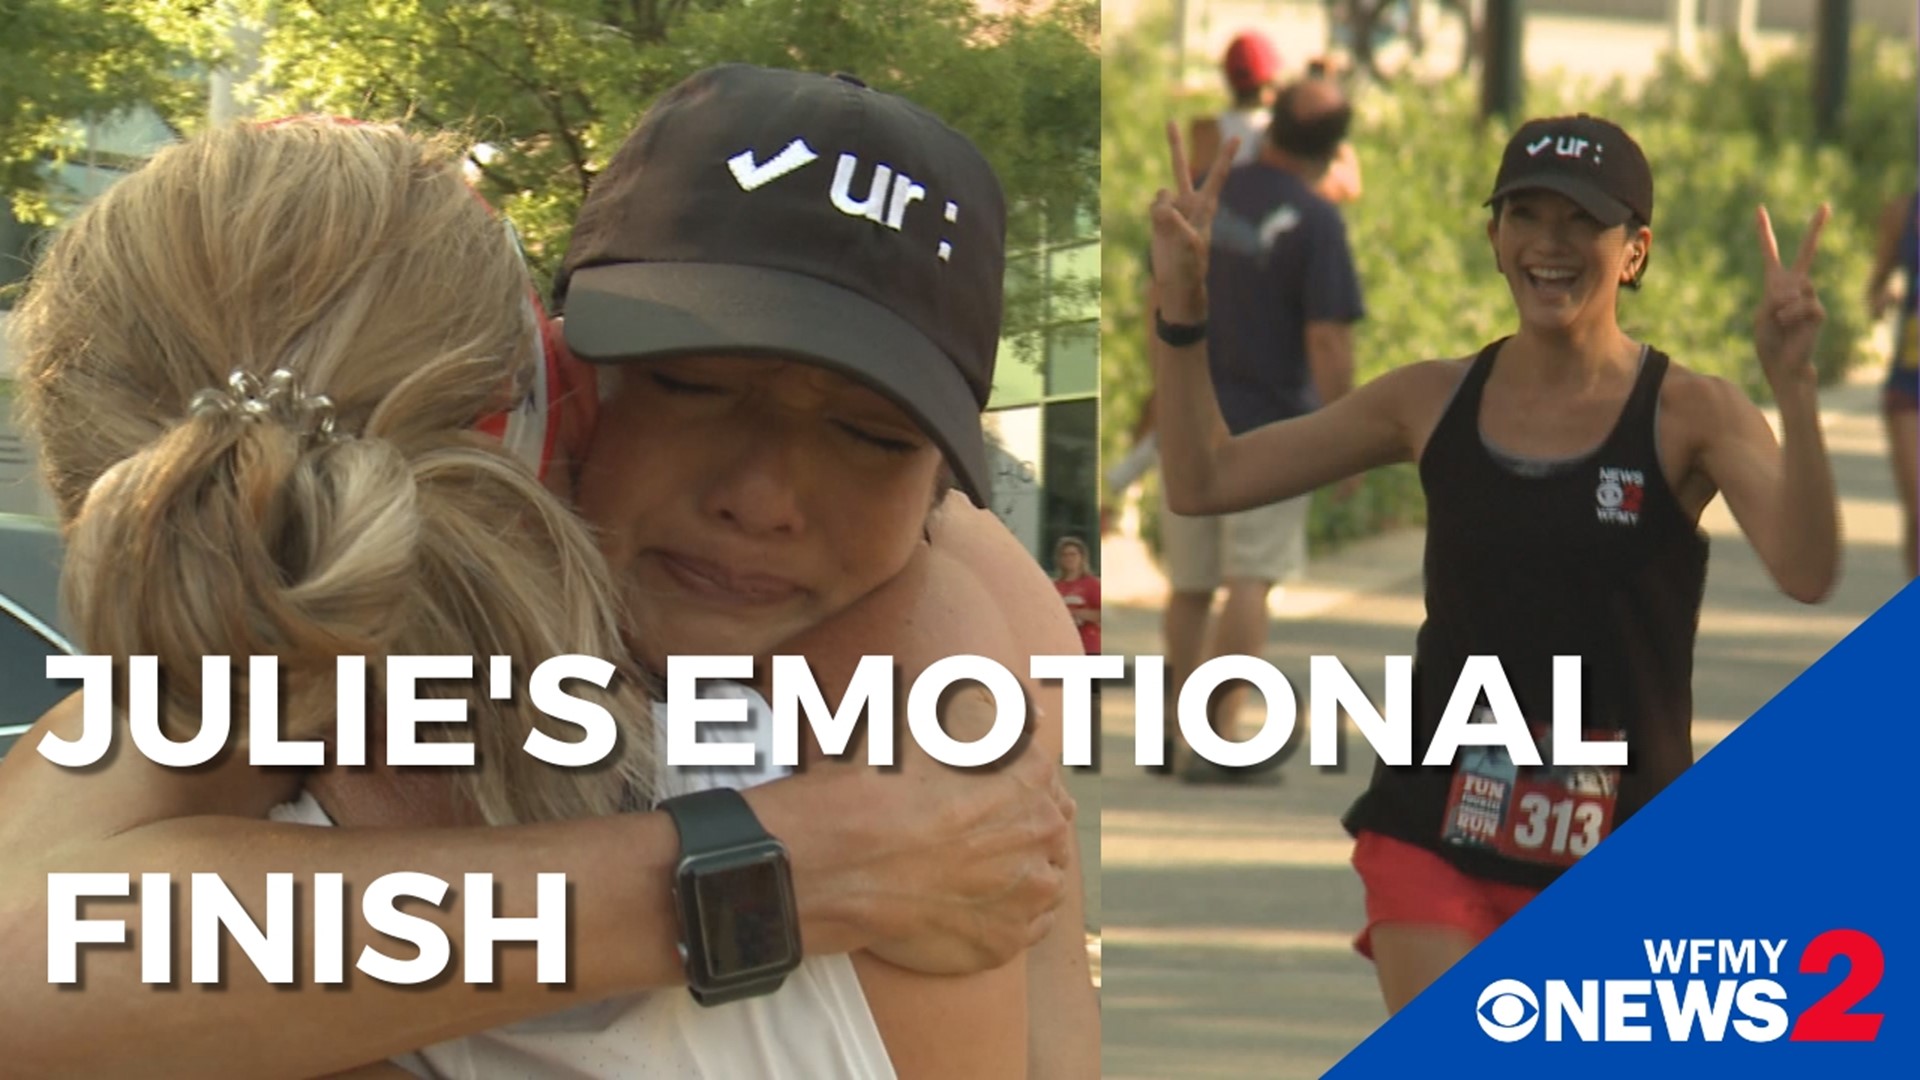 Our Julie Luck just beat colon cancer. The moment she crossed the finish line at the Freedom Run in Greensboro had us all in tears!